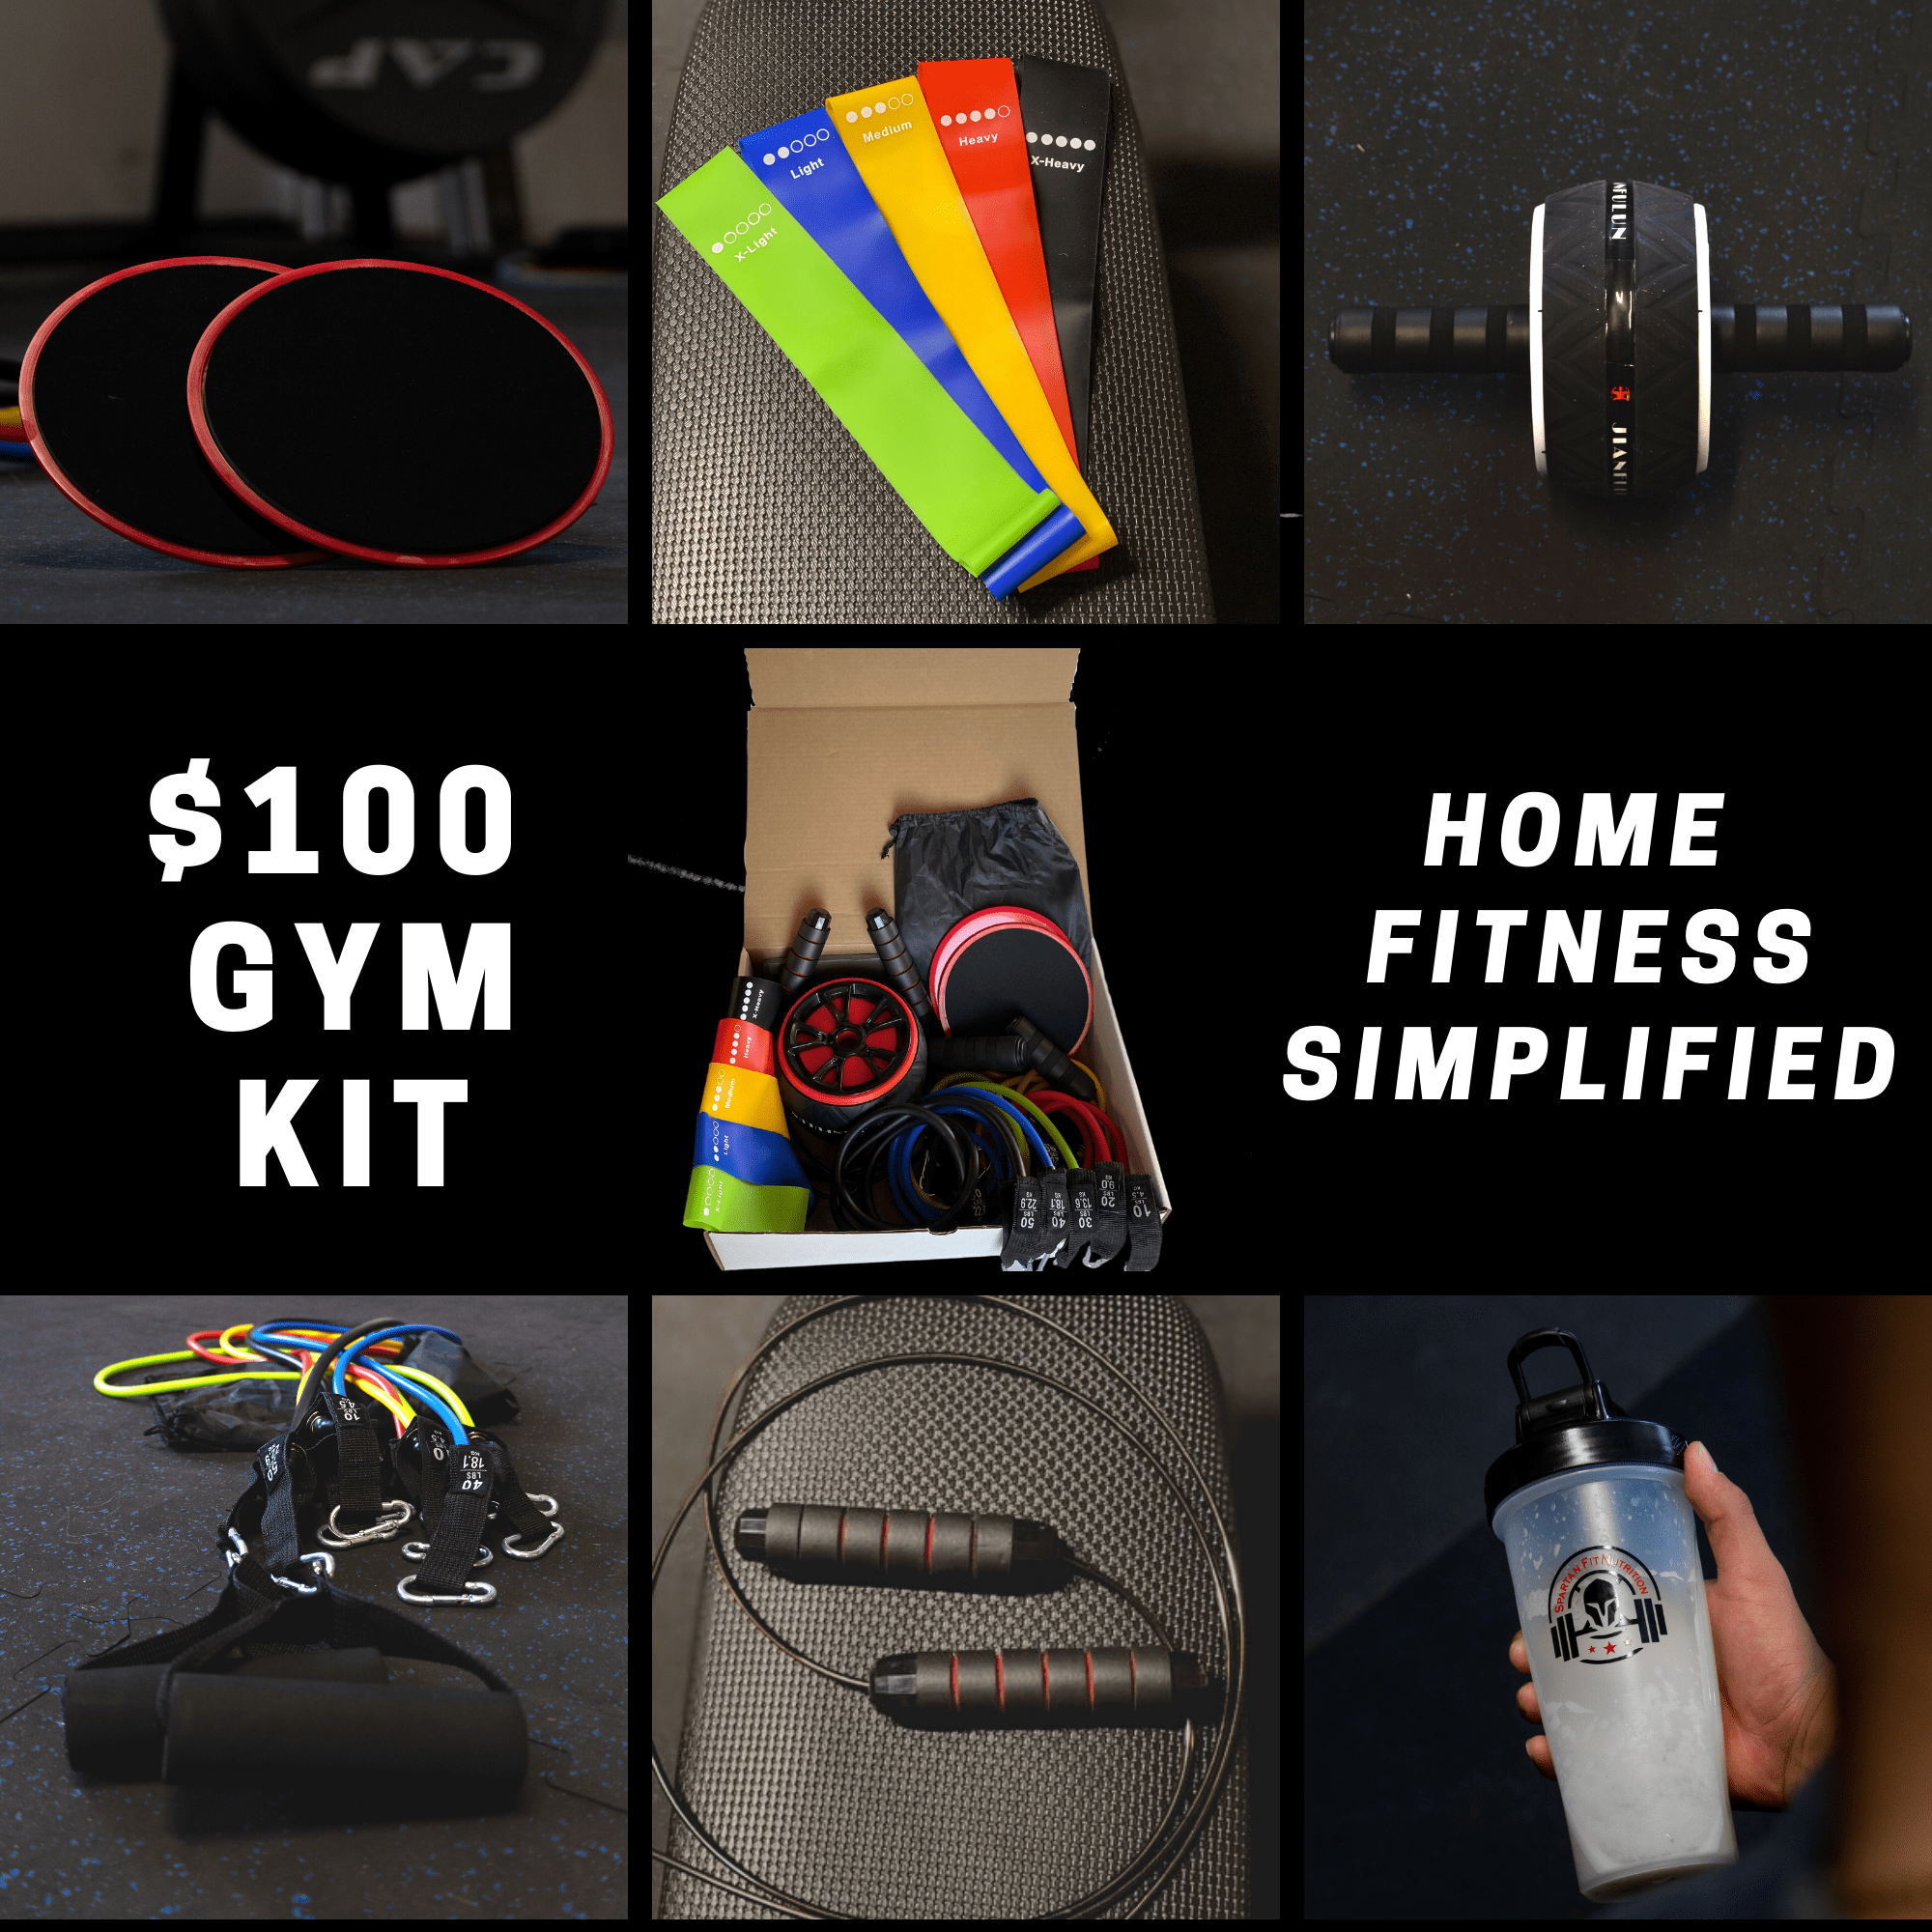 Home Gym Kit includes resistance bands, an ab roller, jump rope, shaker bottle, and sliders.